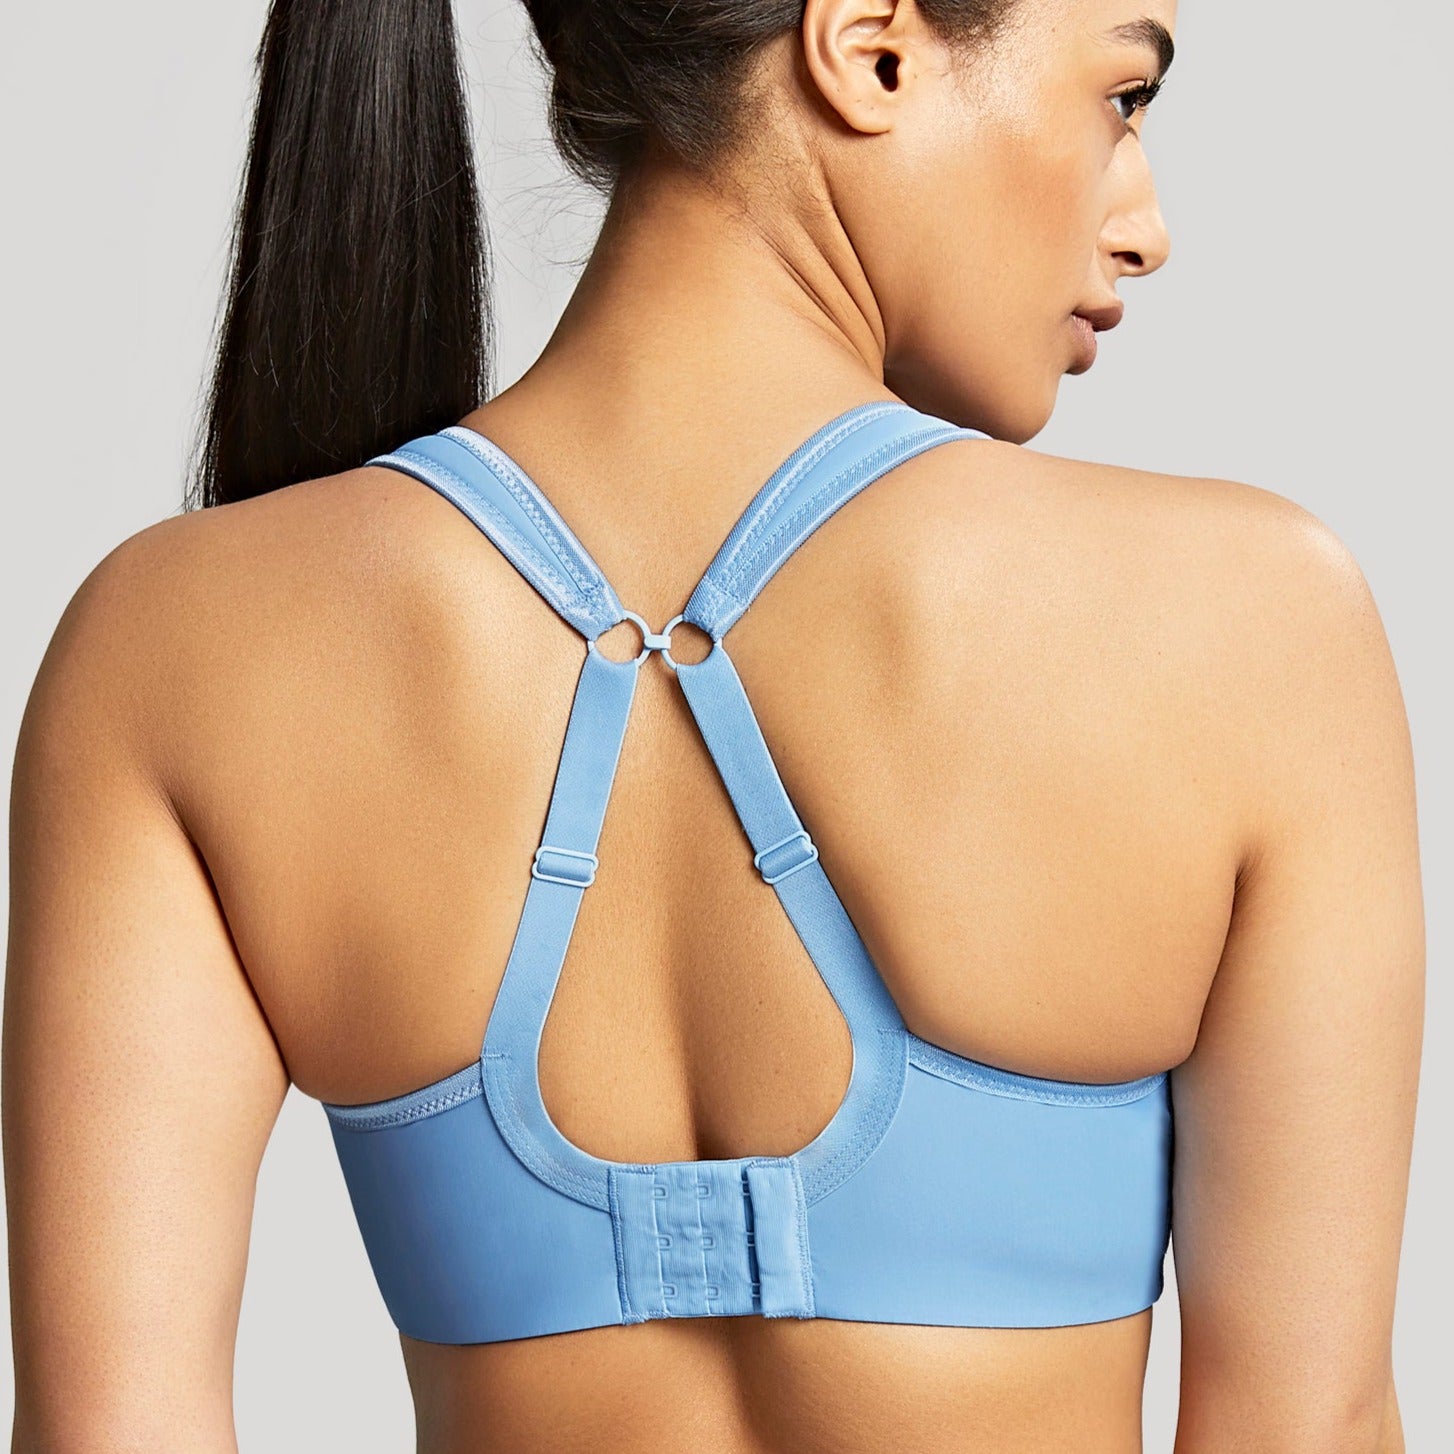 Wired 5021 Sports Bra – The Full Cup